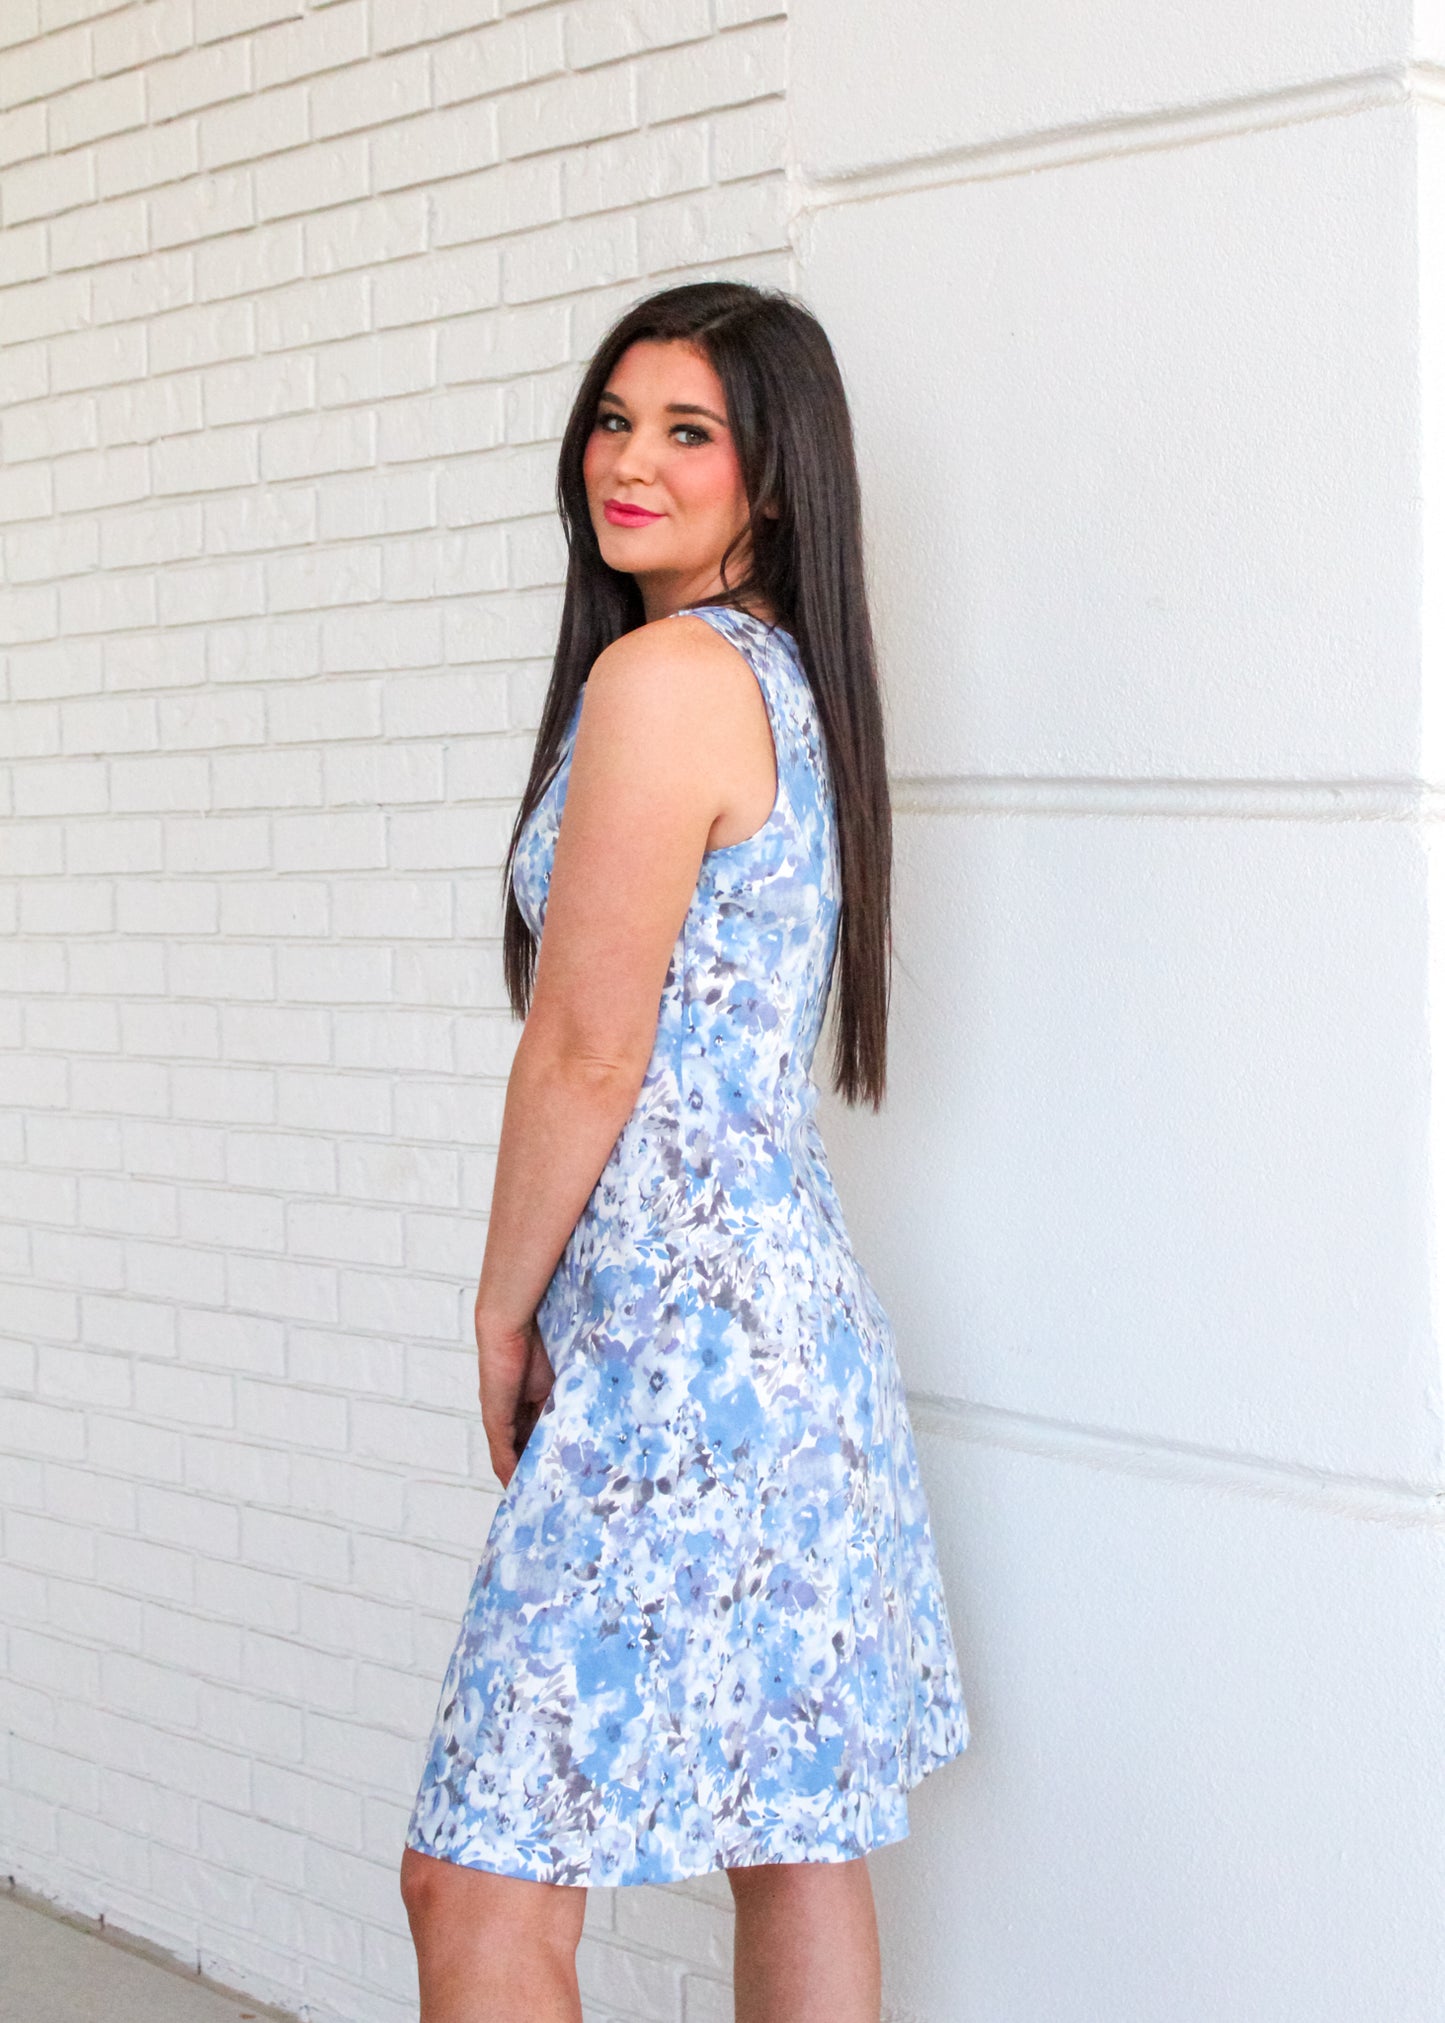 A side view of The Maggie Sleeveless Dress.